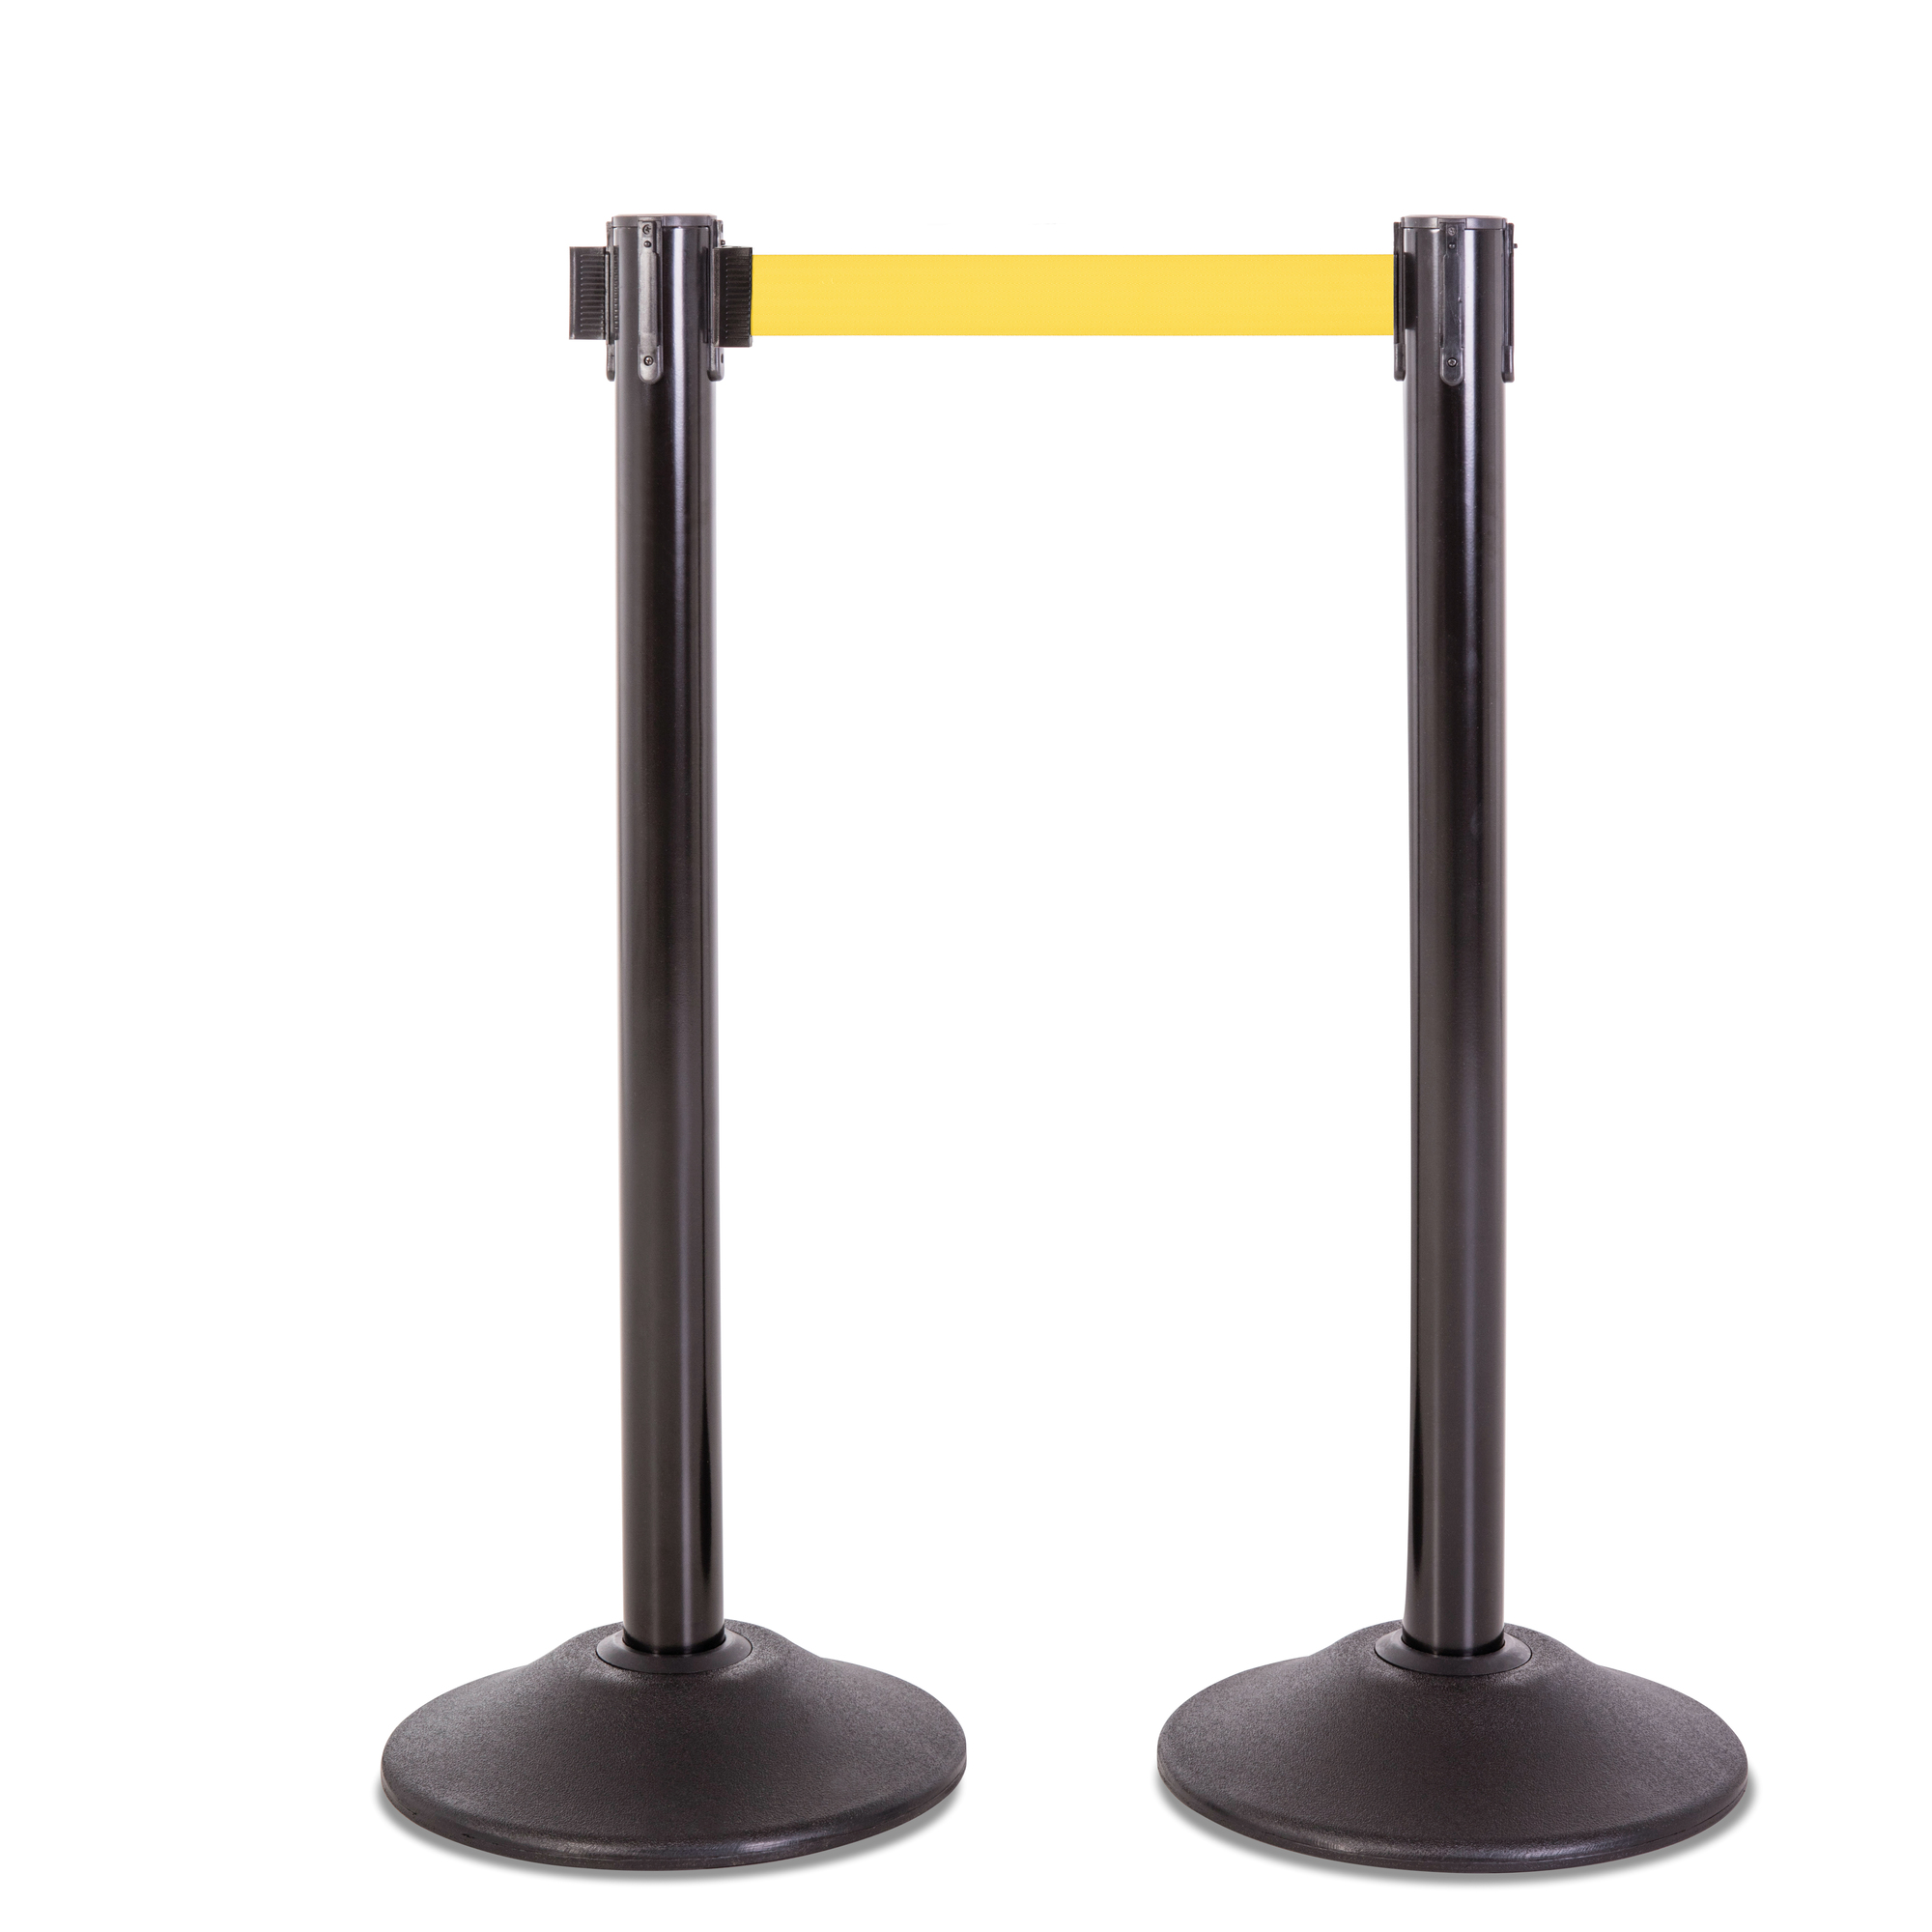 US Weight, Black post and 7.5ft. Yellow Belt - 2 pack, Model U2102YEL